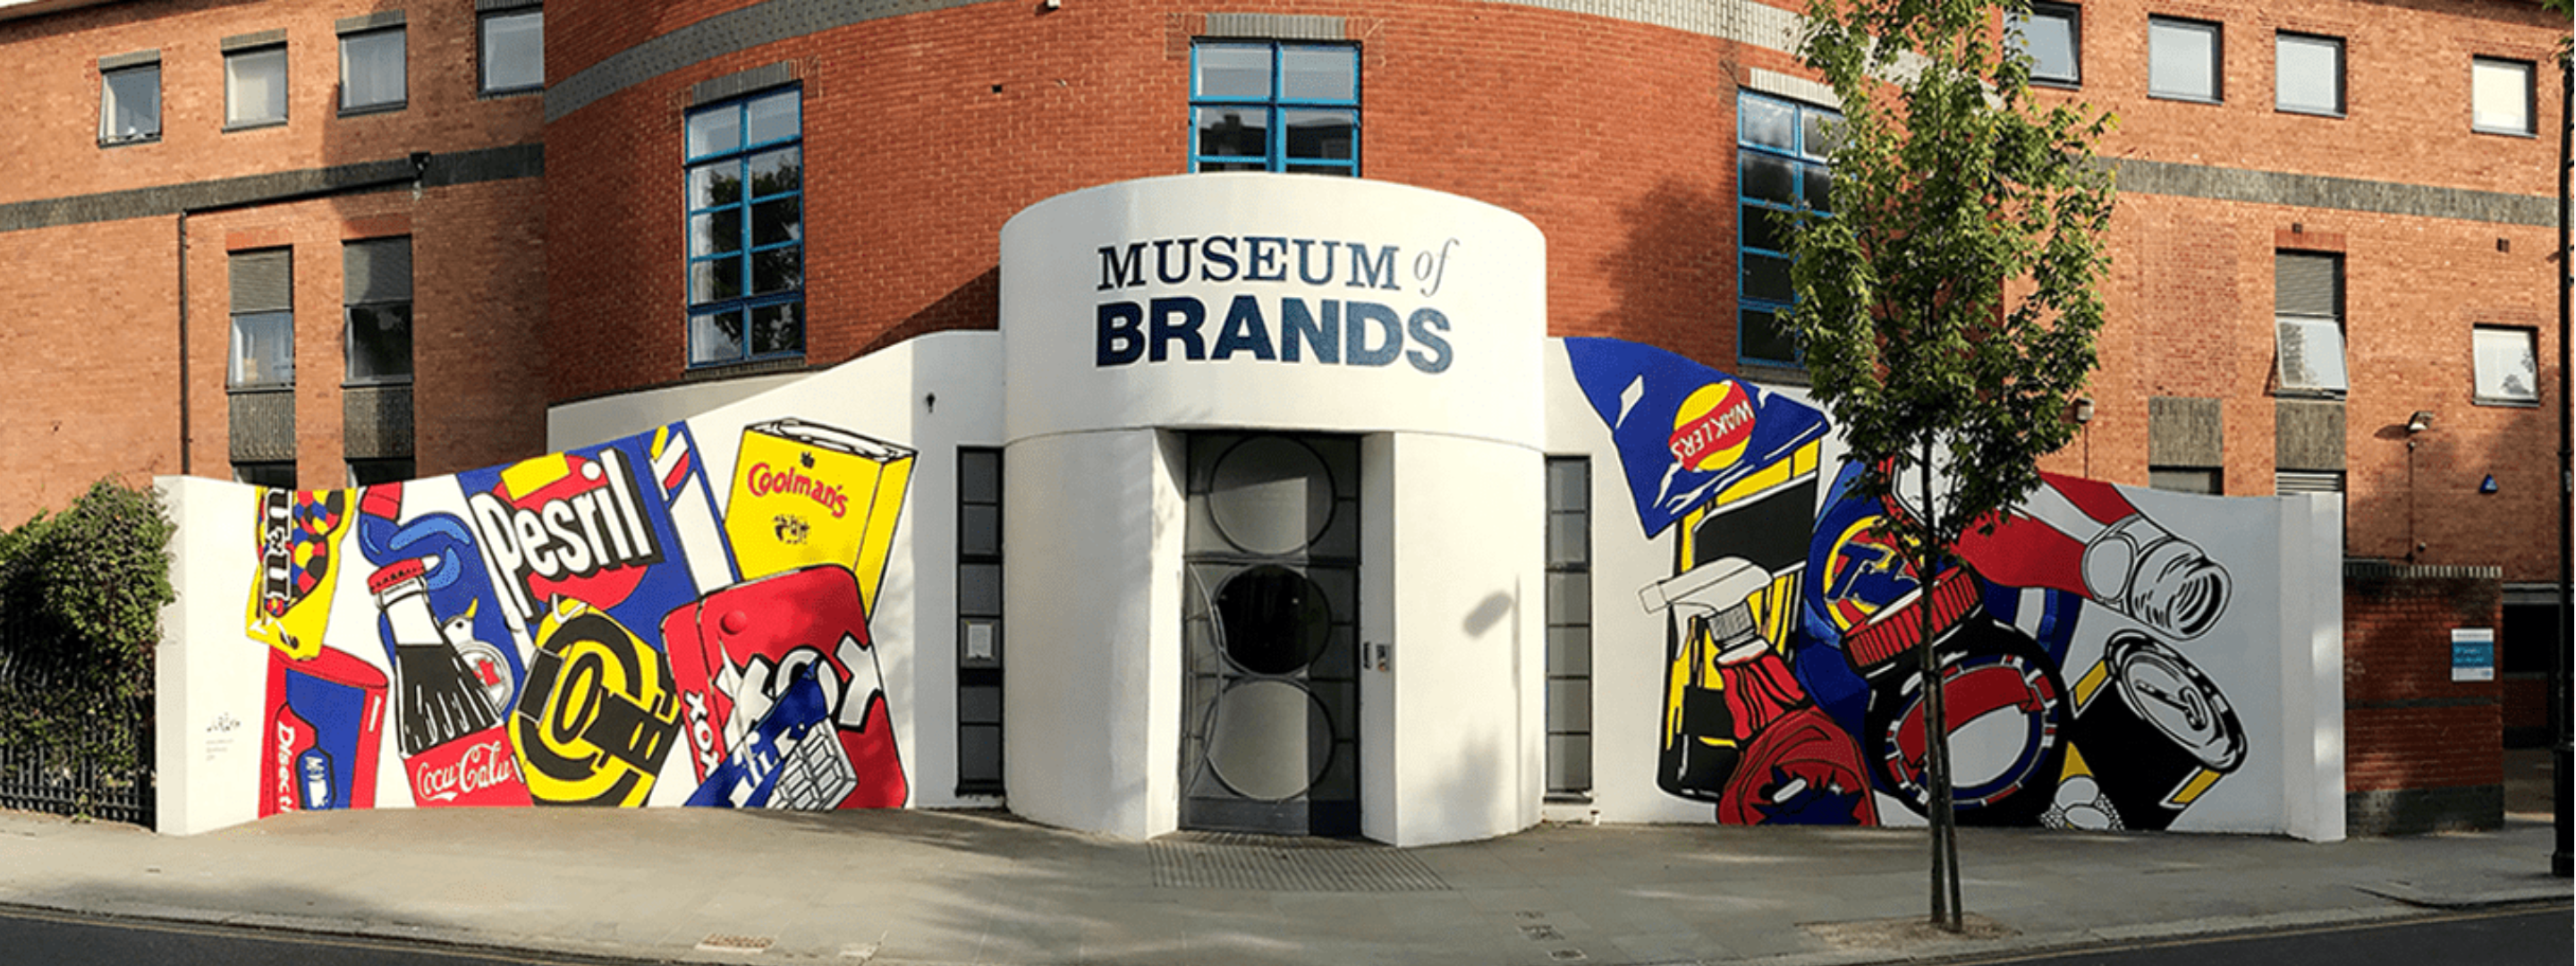 Front of the museum of brands building